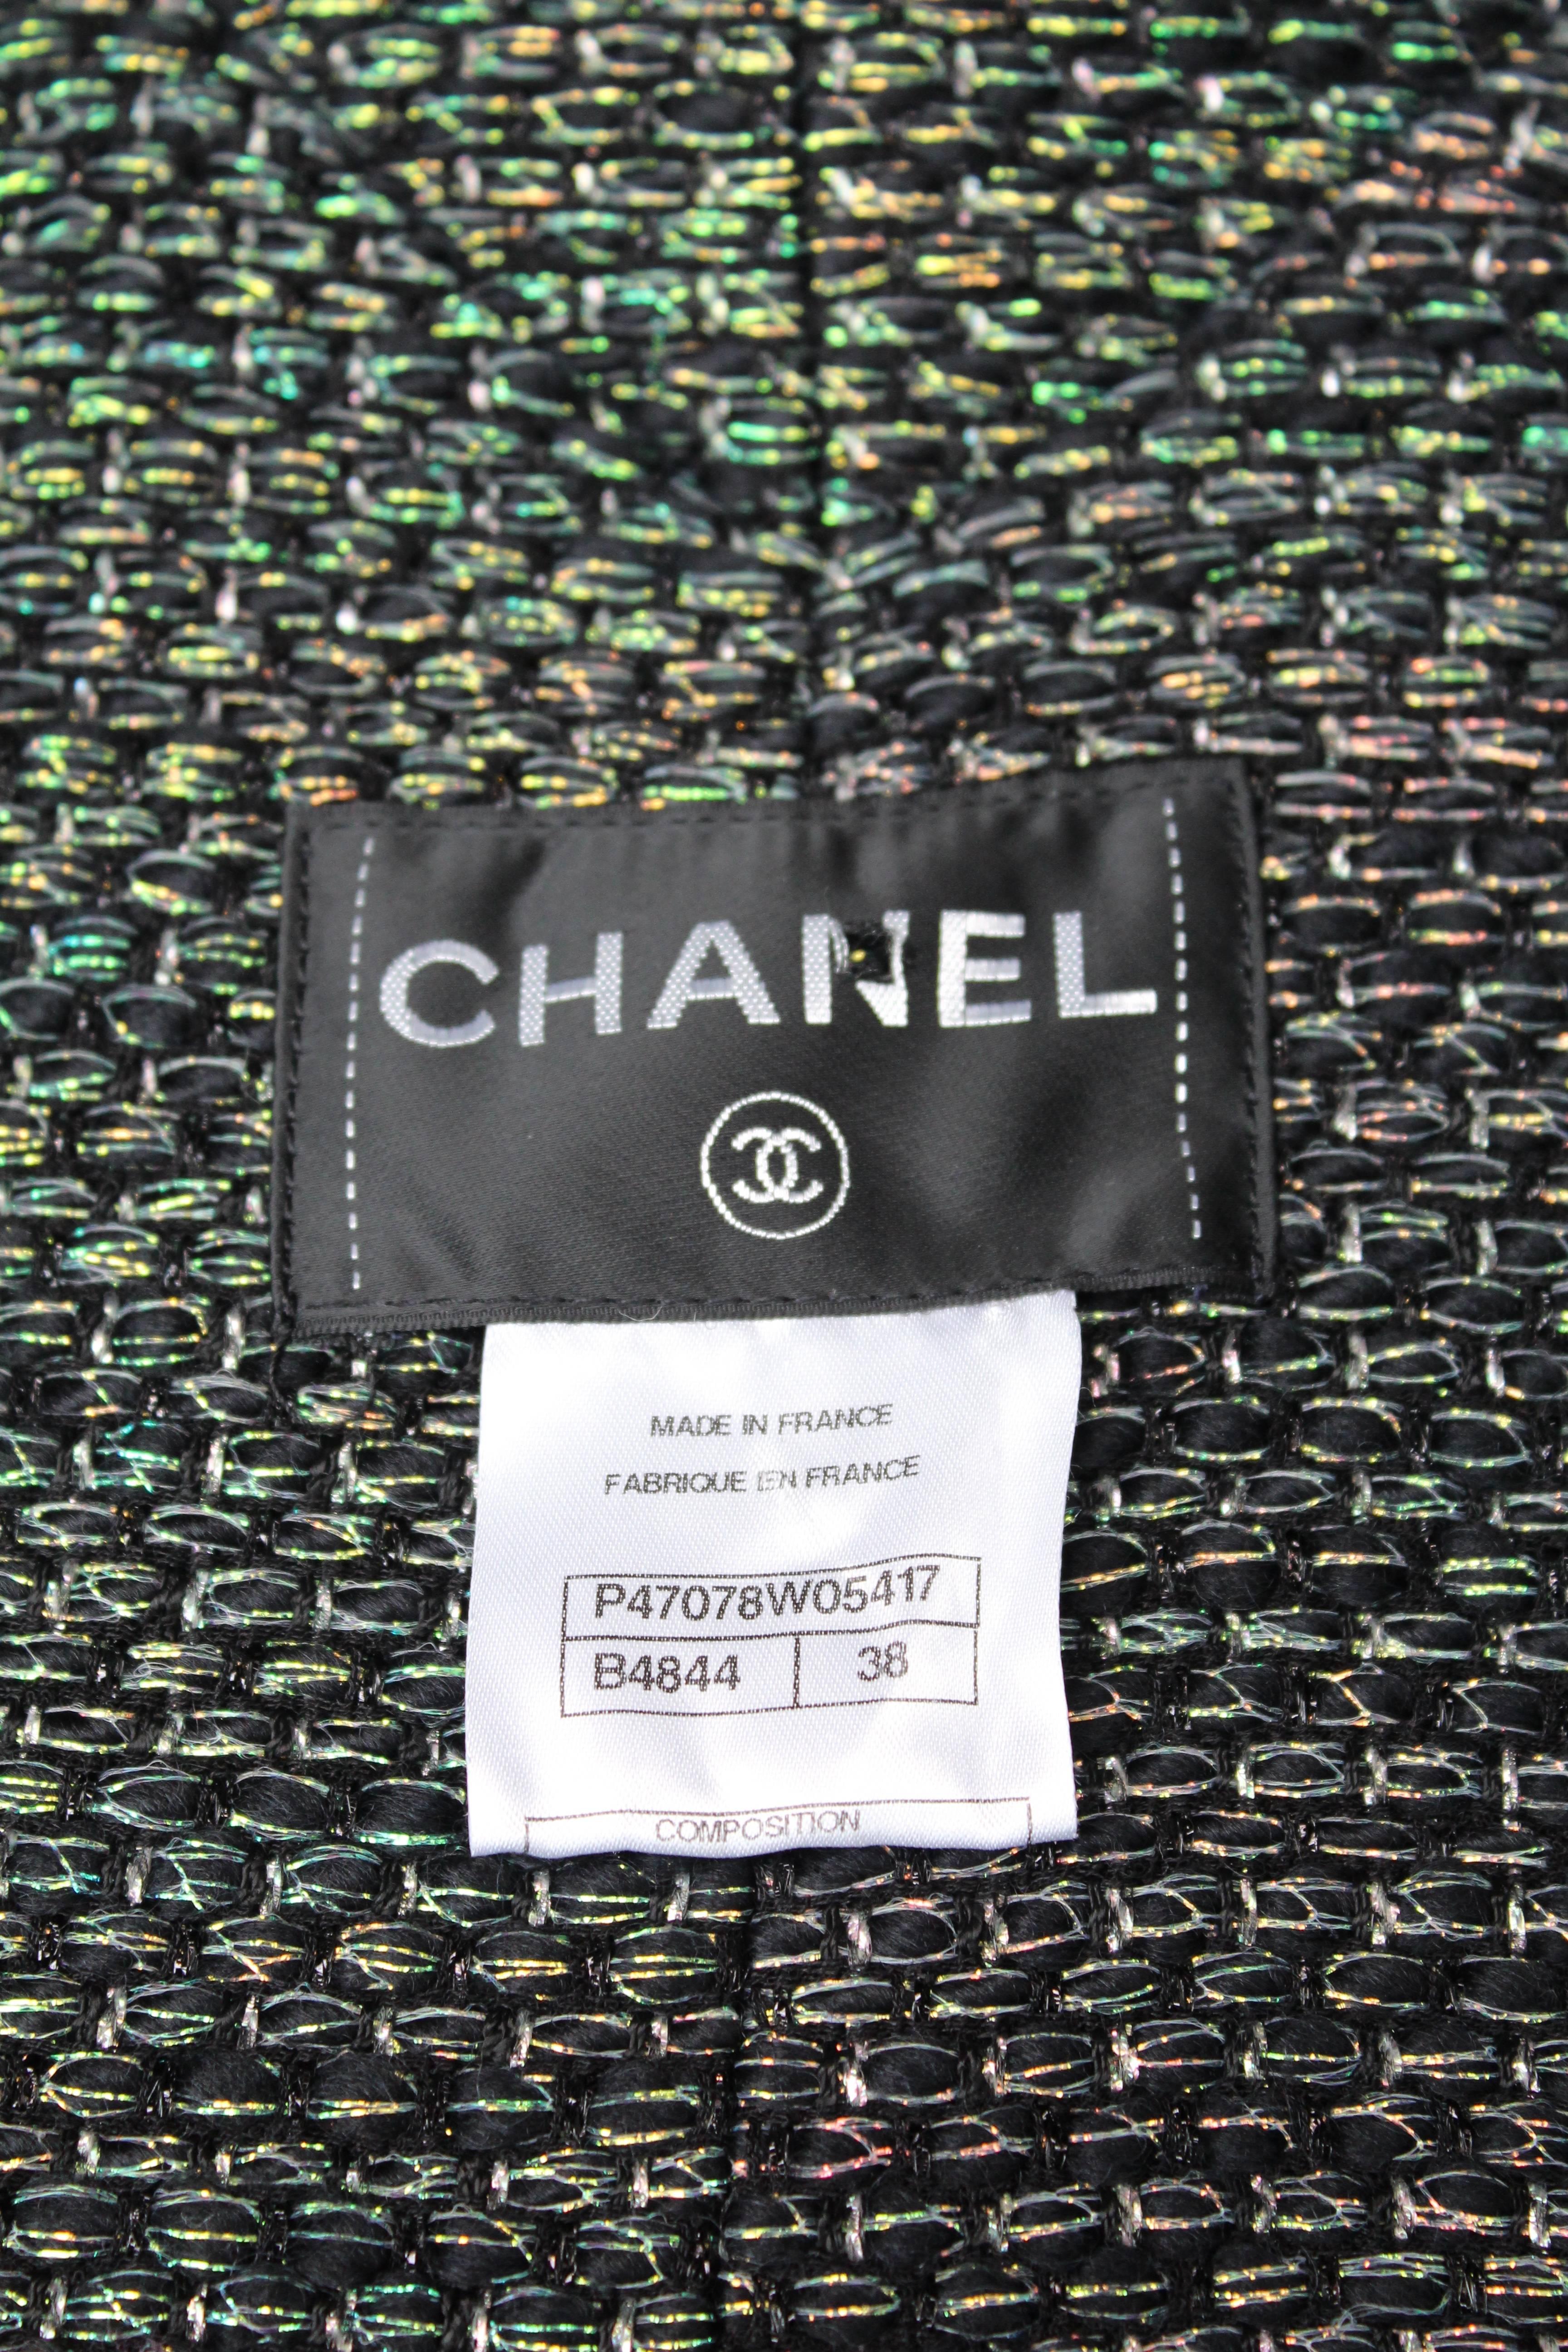 Fall 2013 Chanel Coat in Navy Blue and Iridescent Green Wool Tweed 3